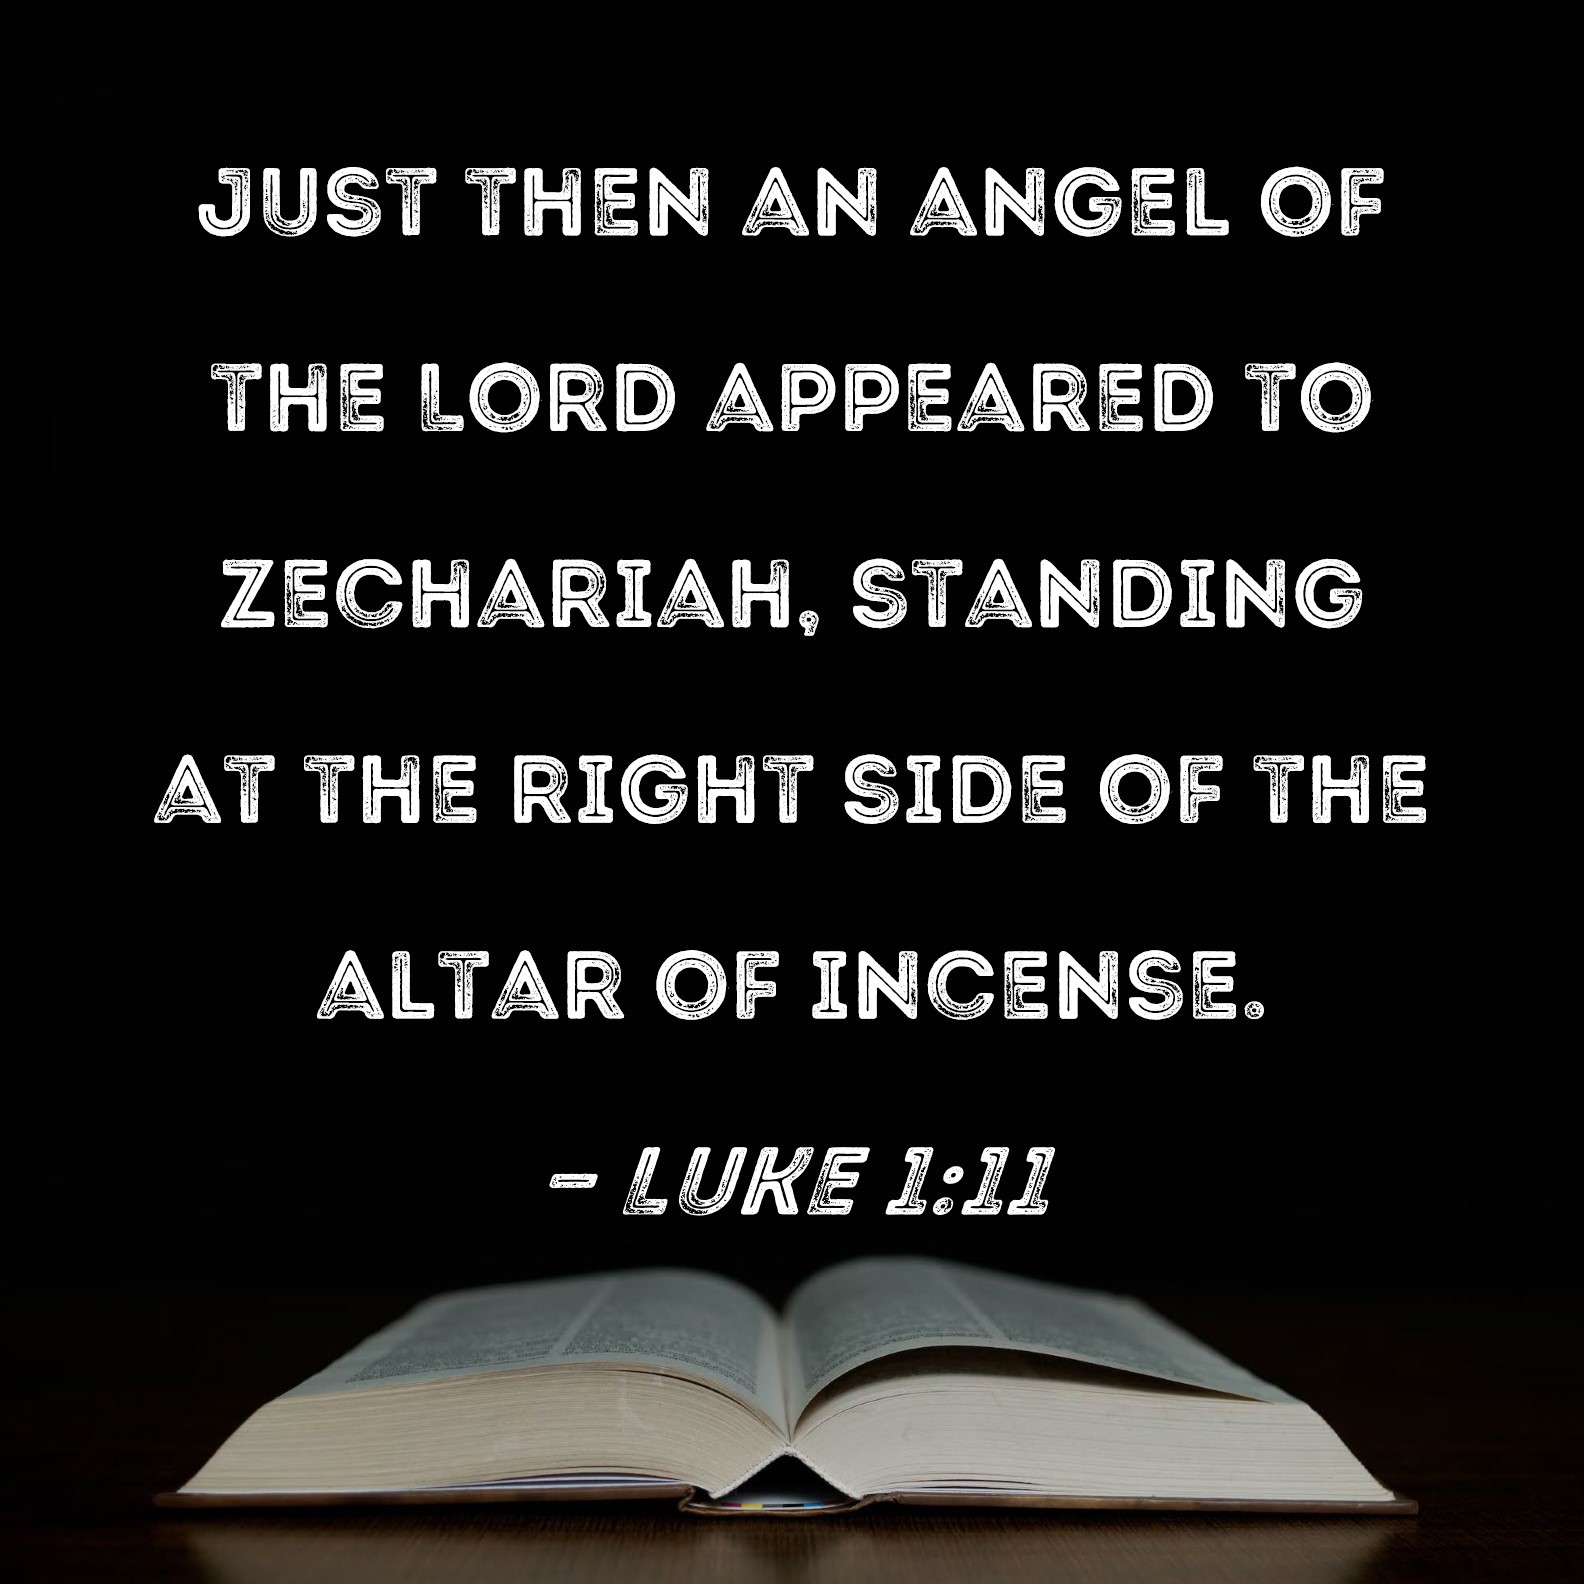 Luke 1:11 Just then an angel of the Lord appeared to Zechariah, standing at  the right side of the altar of incense.